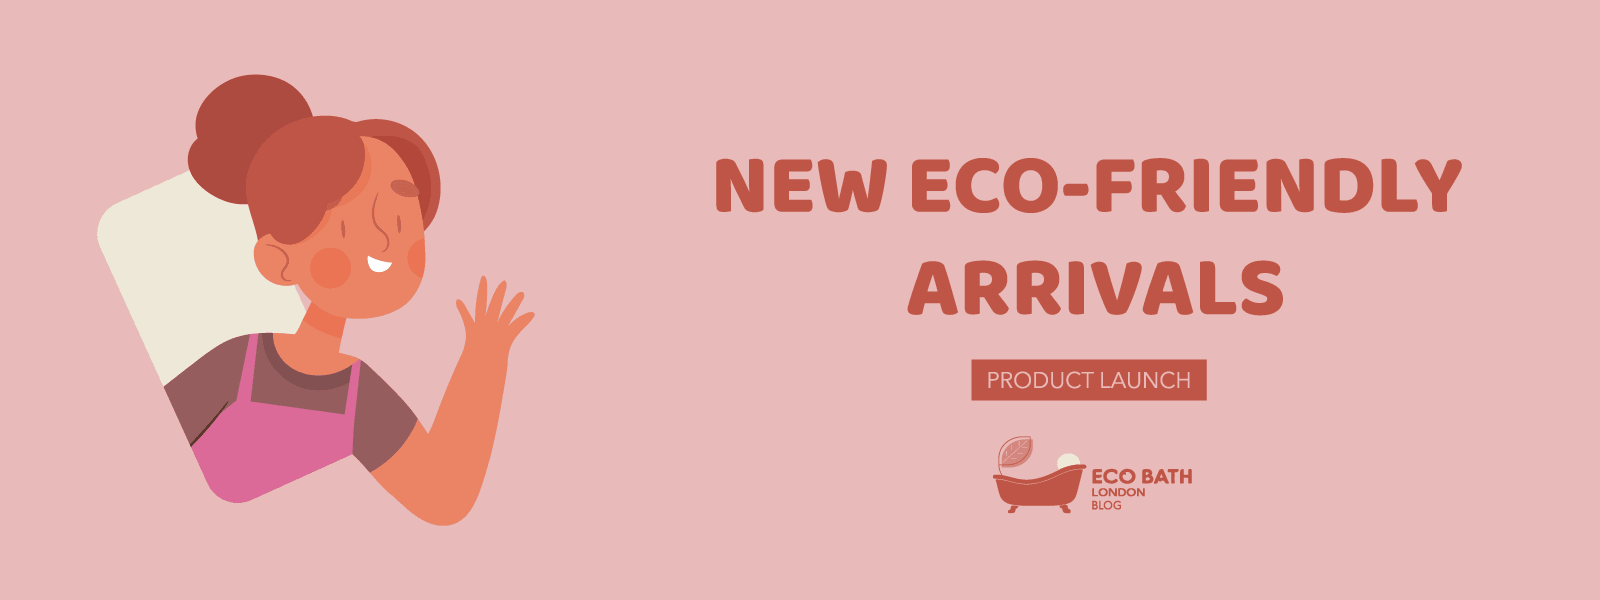 New Eco-Friendly Arrivals